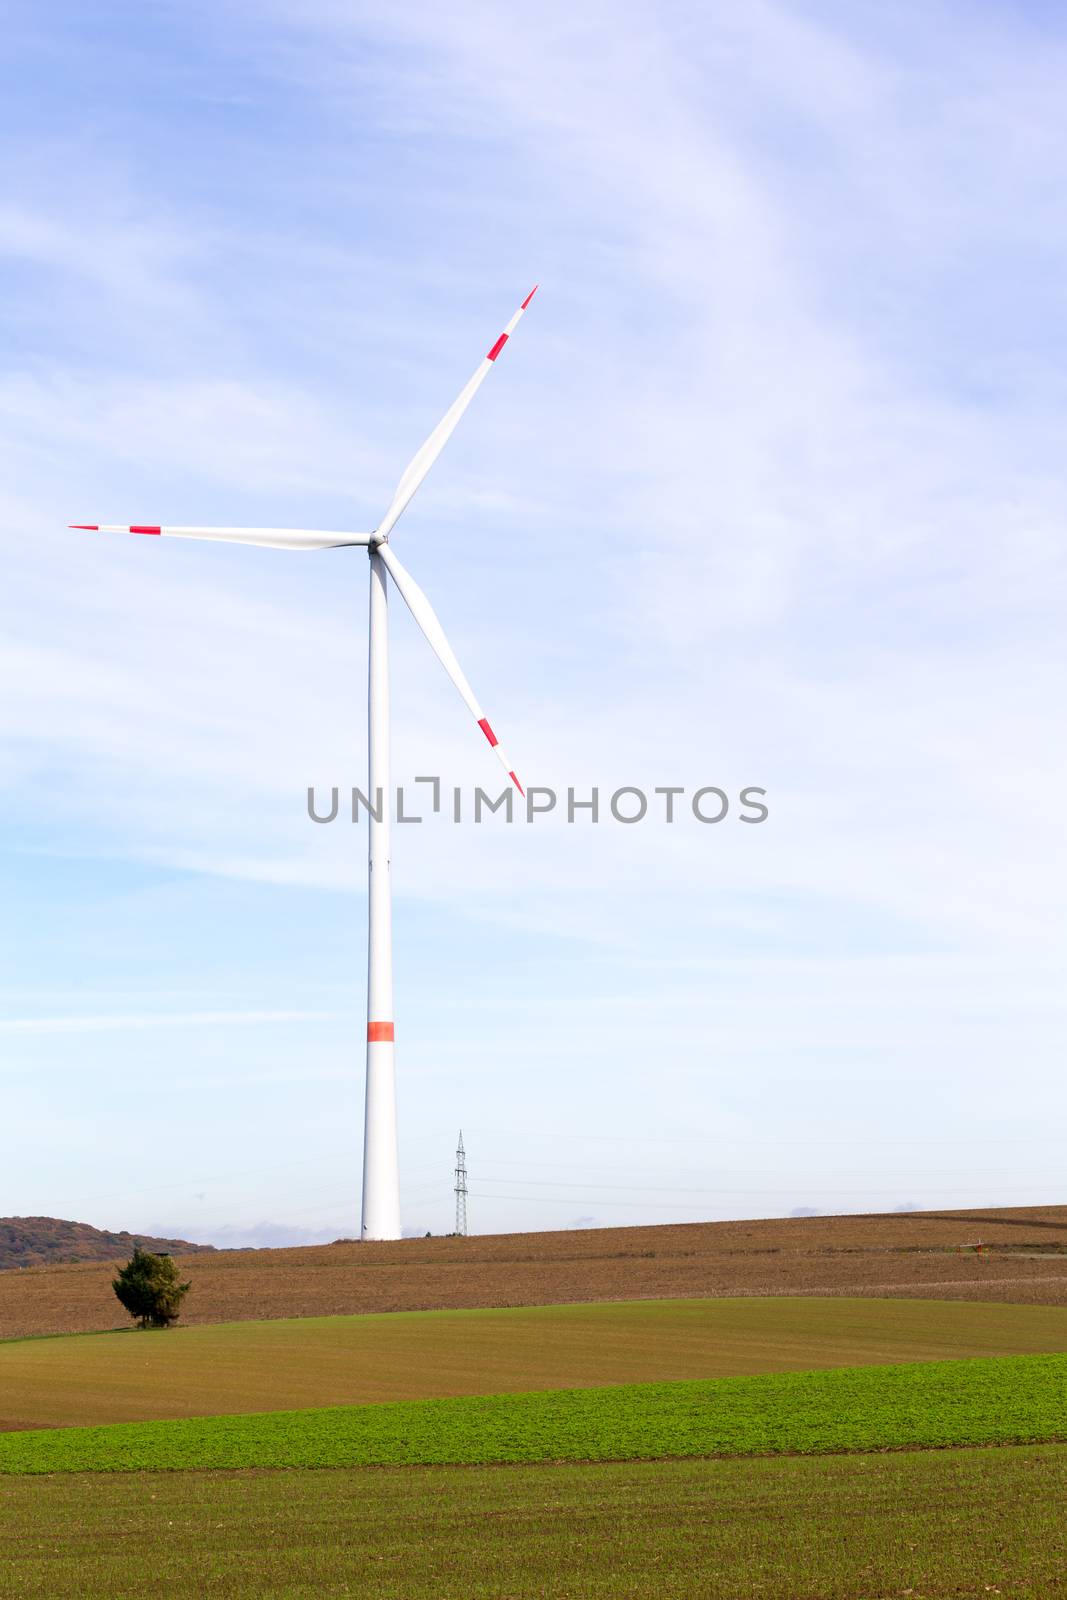 A windmill on a field with blue sky by 25ehaag6